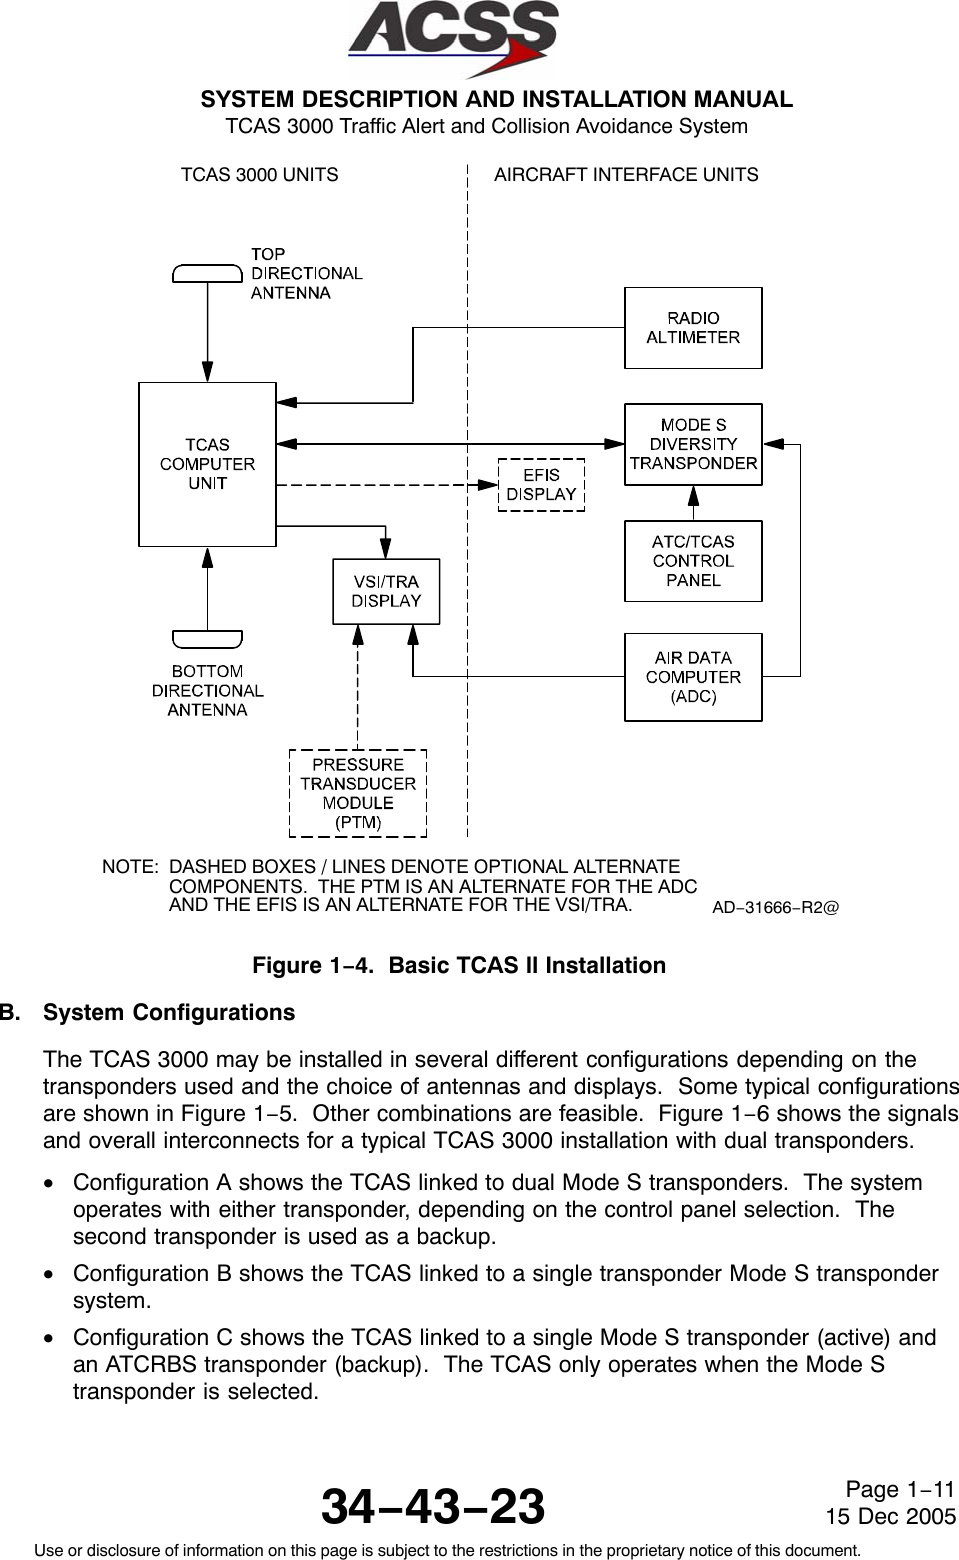 SYSTEM DESCRIPTION AND INSTALLATION MANUAL TCAS 3000 Traffic Alert and Collision Avoidance System34−43−23Use or disclosure of information on this page is subject to the restrictions in the proprietary notice of this document.Page 1−1115 Dec 2005TCAS 3000 UNITS AIRCRAFT INTERFACE UNITSAD−31666−R2@NOTE: DASHED BOXES / LINES DENOTE OPTIONAL ALTERNATECOMPONENTS.  THE PTM IS AN ALTERNATE FOR THE ADCAND THE EFIS IS AN ALTERNATE FOR THE VSI/TRA.Figure 1−4.  Basic TCAS ll InstallationB. System ConfigurationsThe TCAS 3000 may be installed in several different configurations depending on thetransponders used and the choice of antennas and displays.  Some typical configurationsare shown in Figure 1−5.  Other combinations are feasible.  Figure 1−6 shows the signalsand overall interconnects for a typical TCAS 3000 installation with dual transponders.•Configuration A shows the TCAS linked to dual Mode S transponders.  The systemoperates with either transponder, depending on the control panel selection.  Thesecond transponder is used as a backup.•Configuration B shows the TCAS linked to a single transponder Mode S transpondersystem.•Configuration C shows the TCAS linked to a single Mode S transponder (active) andan ATCRBS transponder (backup).  The TCAS only operates when the Mode Stransponder is selected.